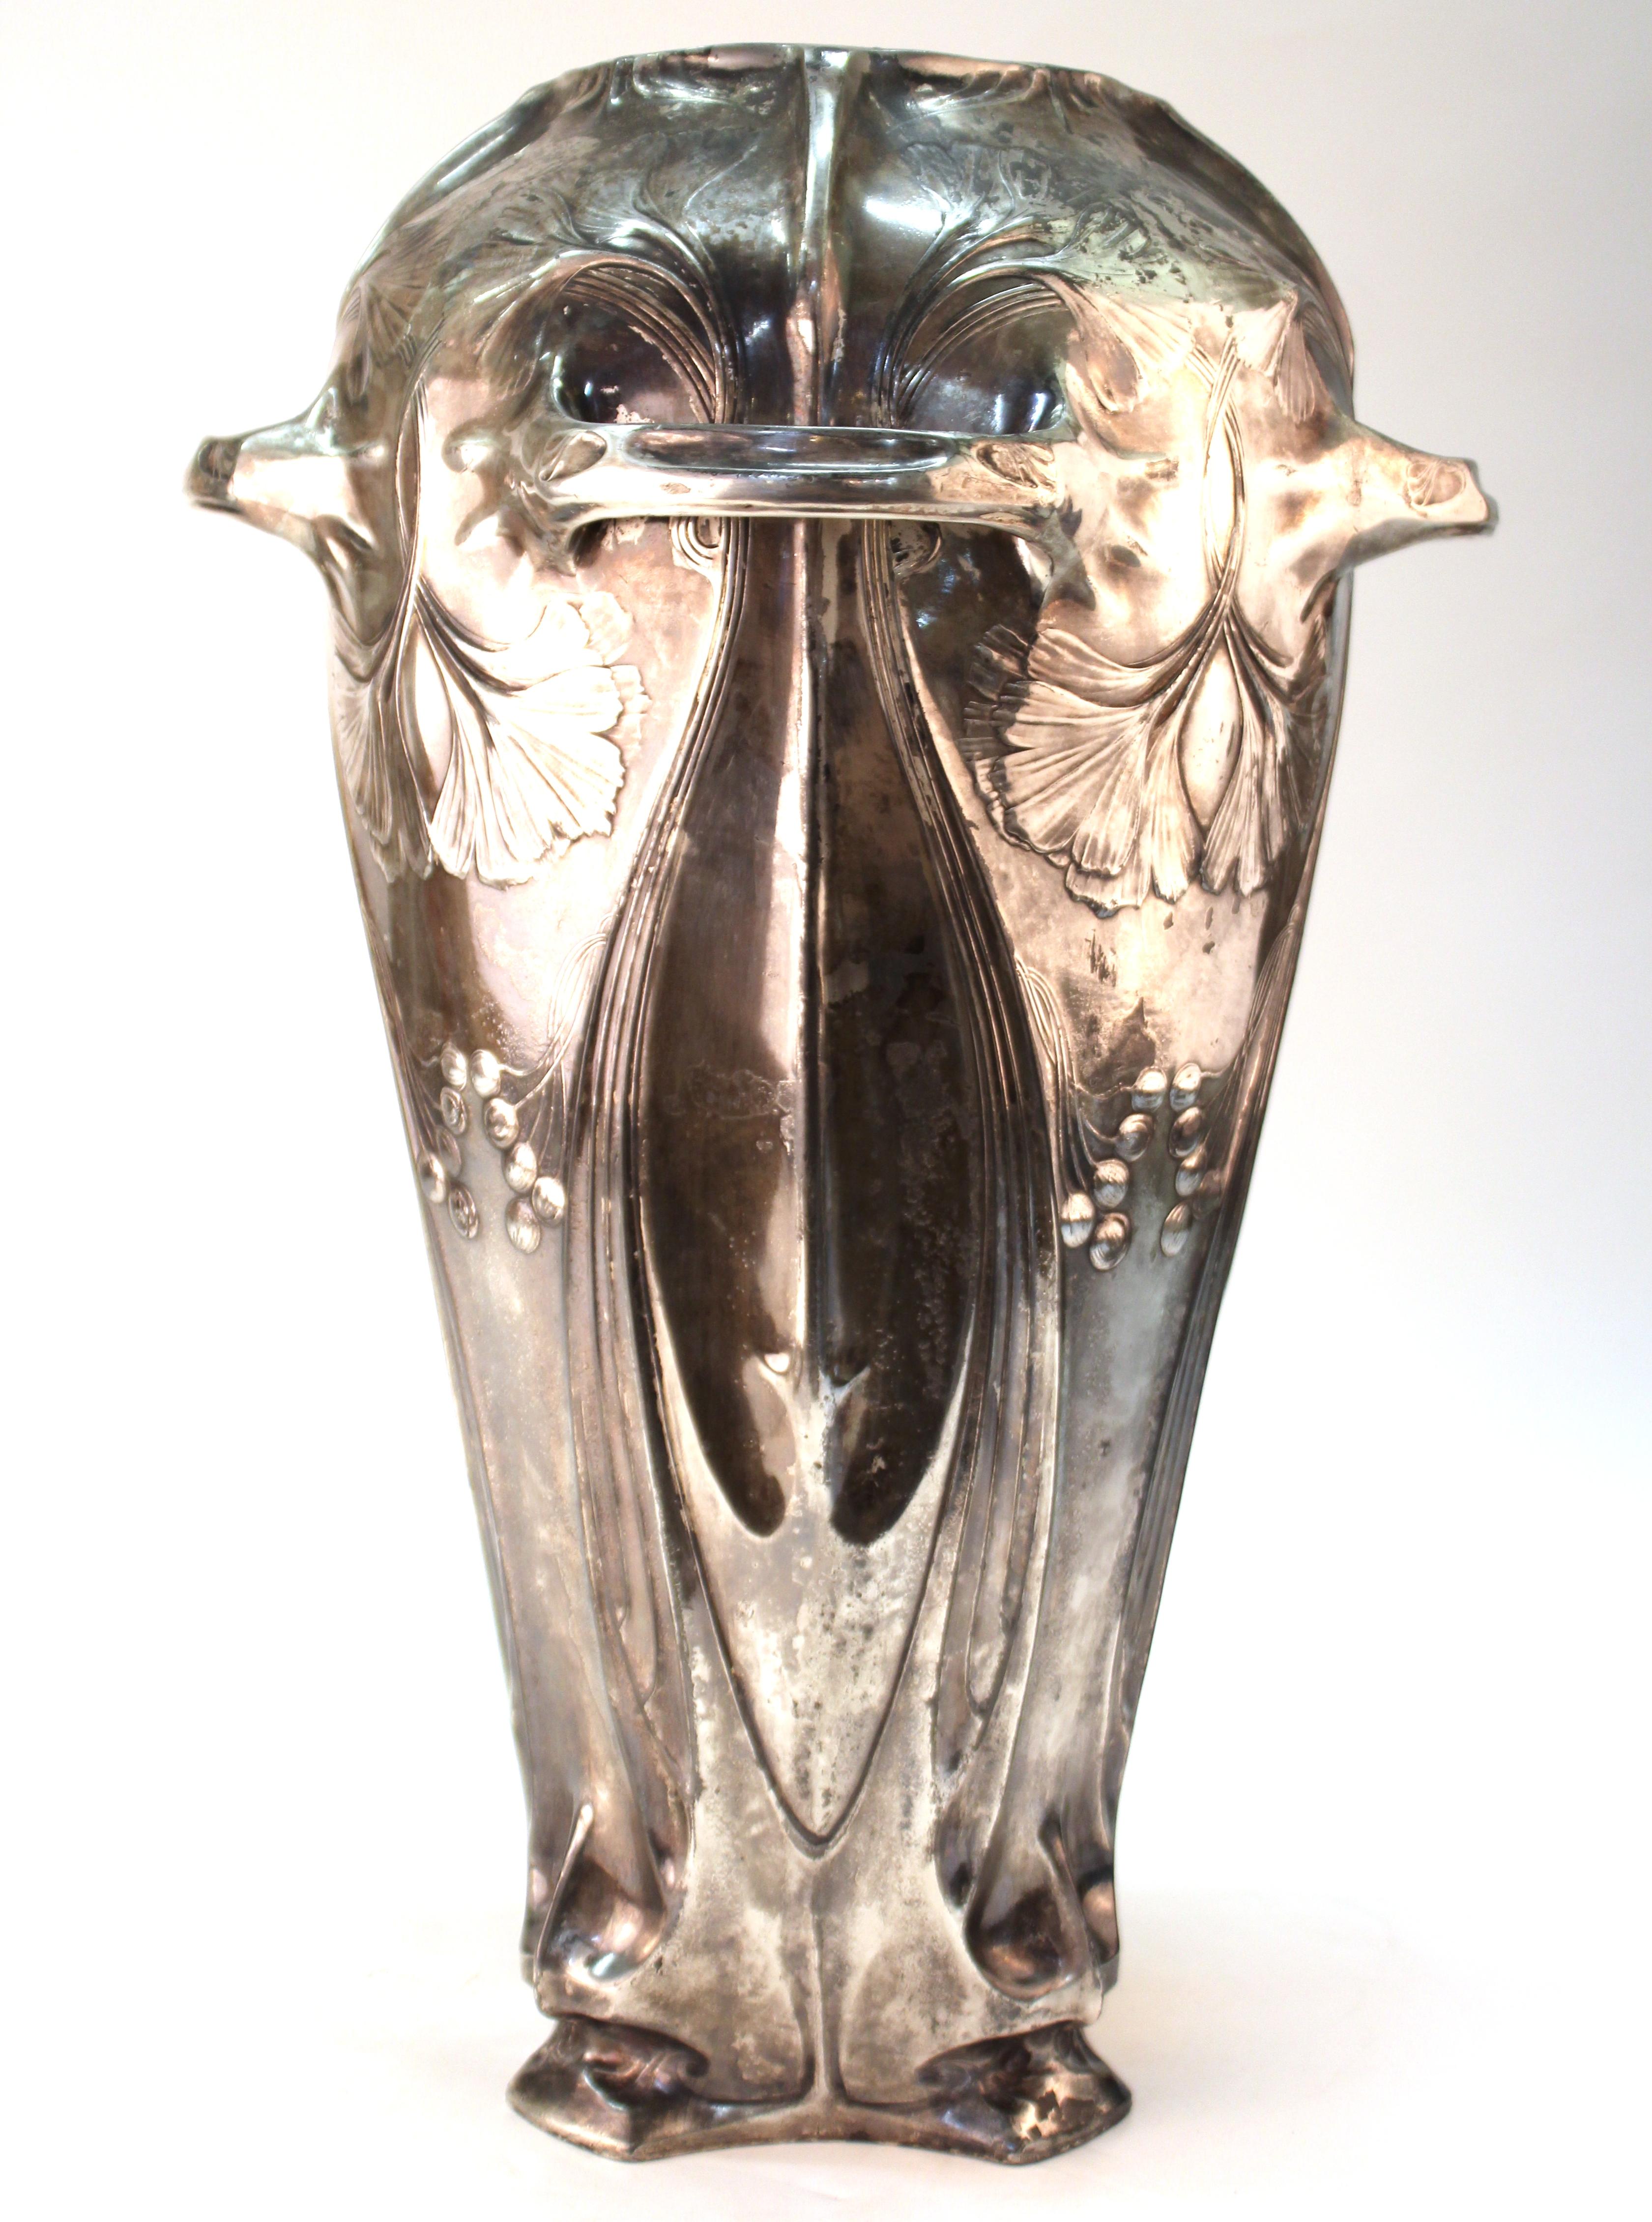 German Jugendstil period monumental decorative vase made of silvered brass, with handles, decorative foliage and leaves motif, characteristic of the German Jugendstil period of the early 20th century. The piece was likely made, circa 1900 and is in